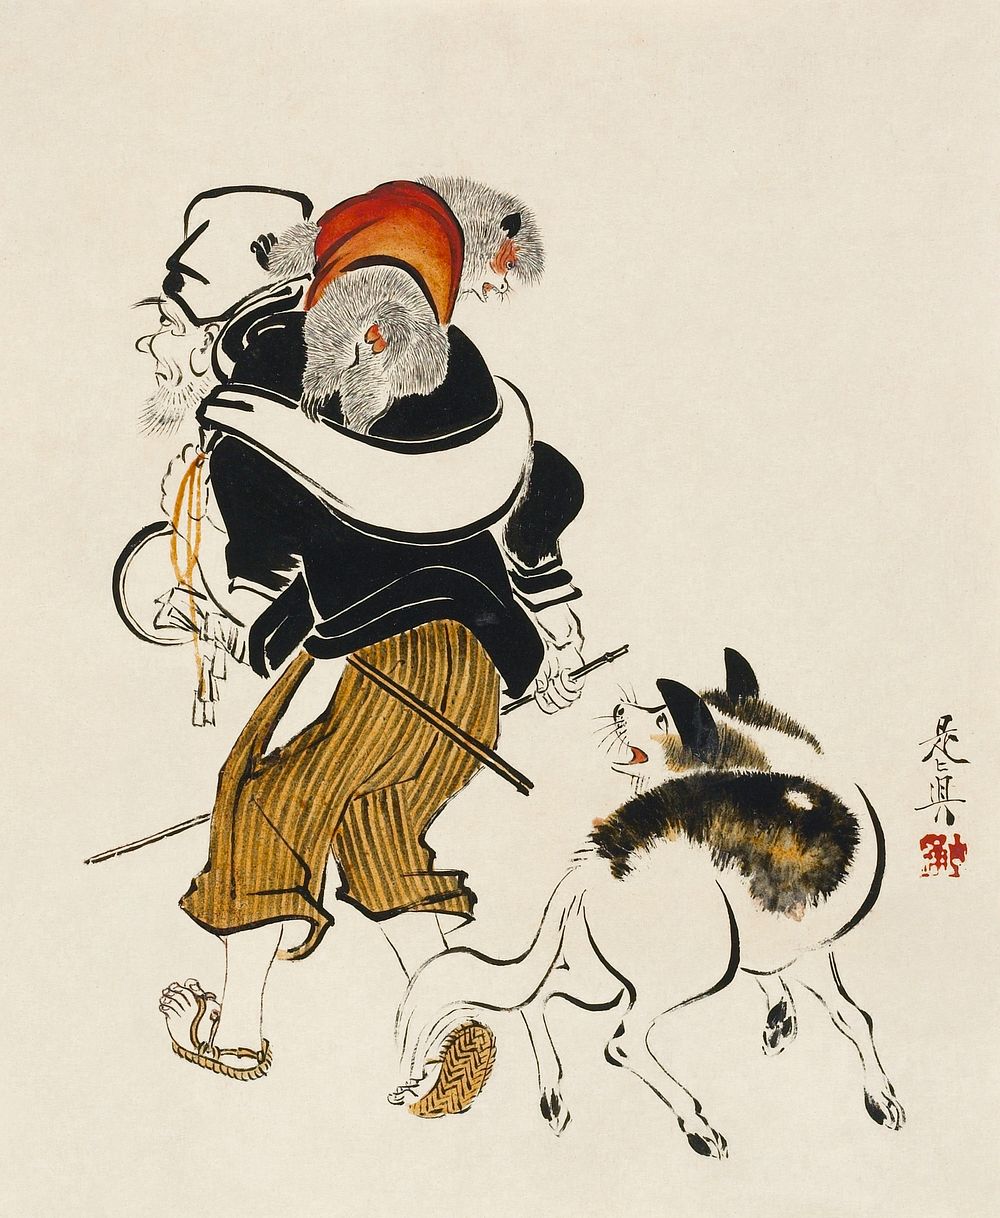 Dog barking at a monkey trainer (19th century) vintage painting by Shibata Zeshin. Original public domain image from the…